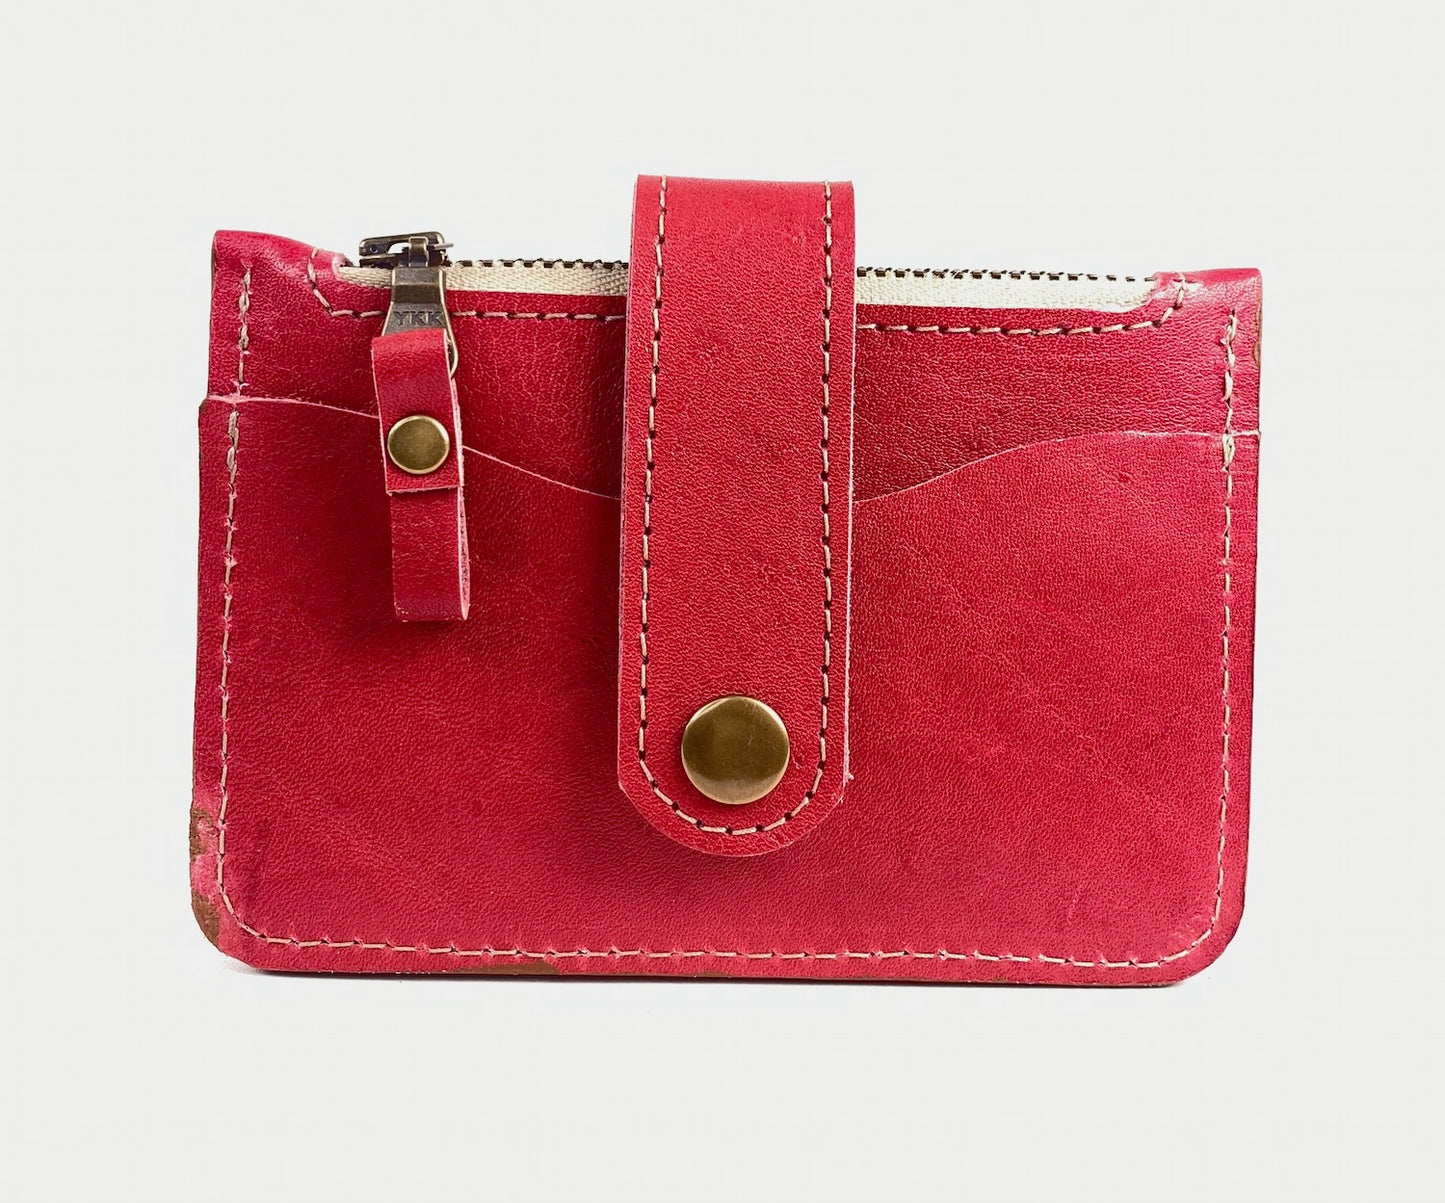 CardGuard Minimalist Leather Wallet in Red